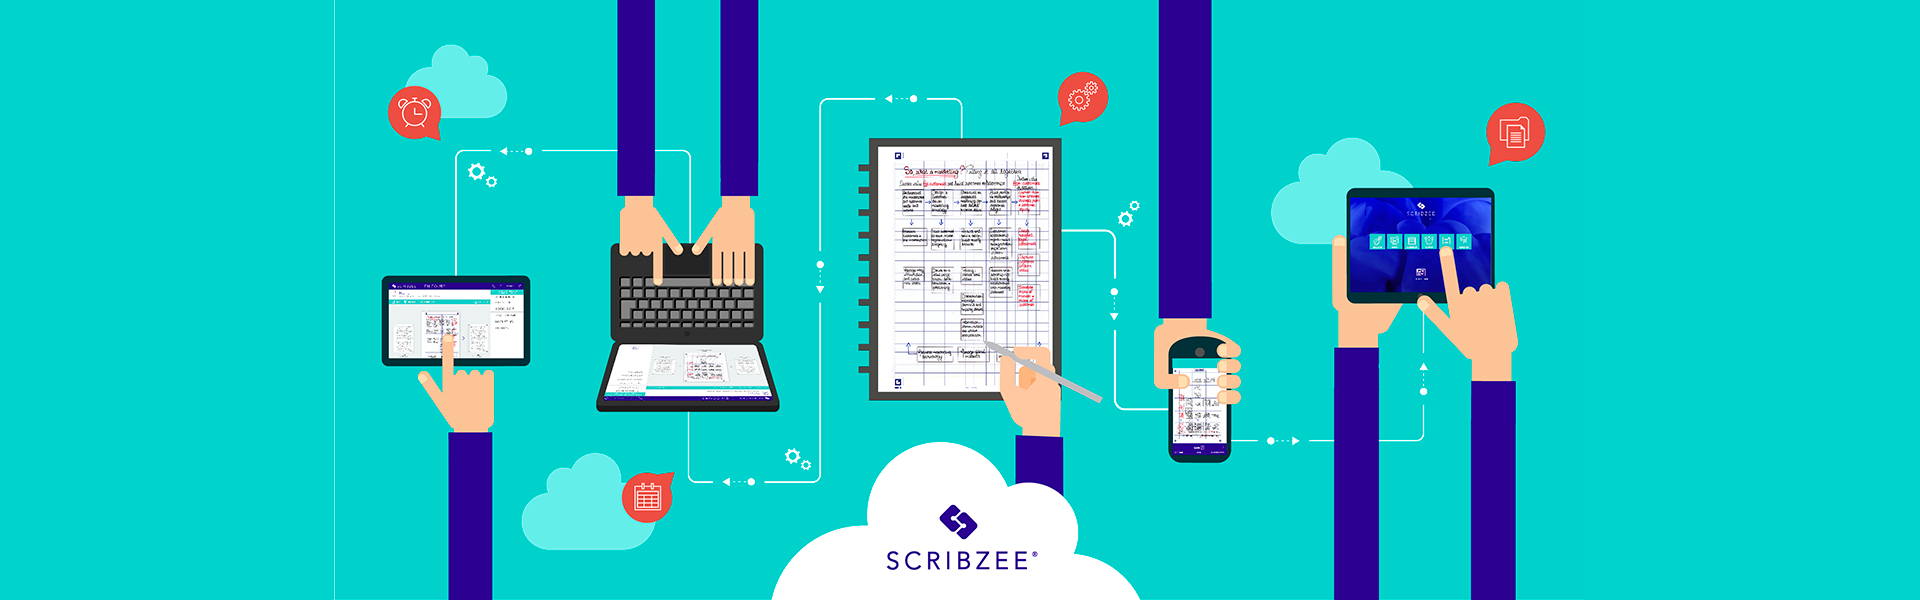 SCRIBZEE App, scan, save, access, share your handwritten notes